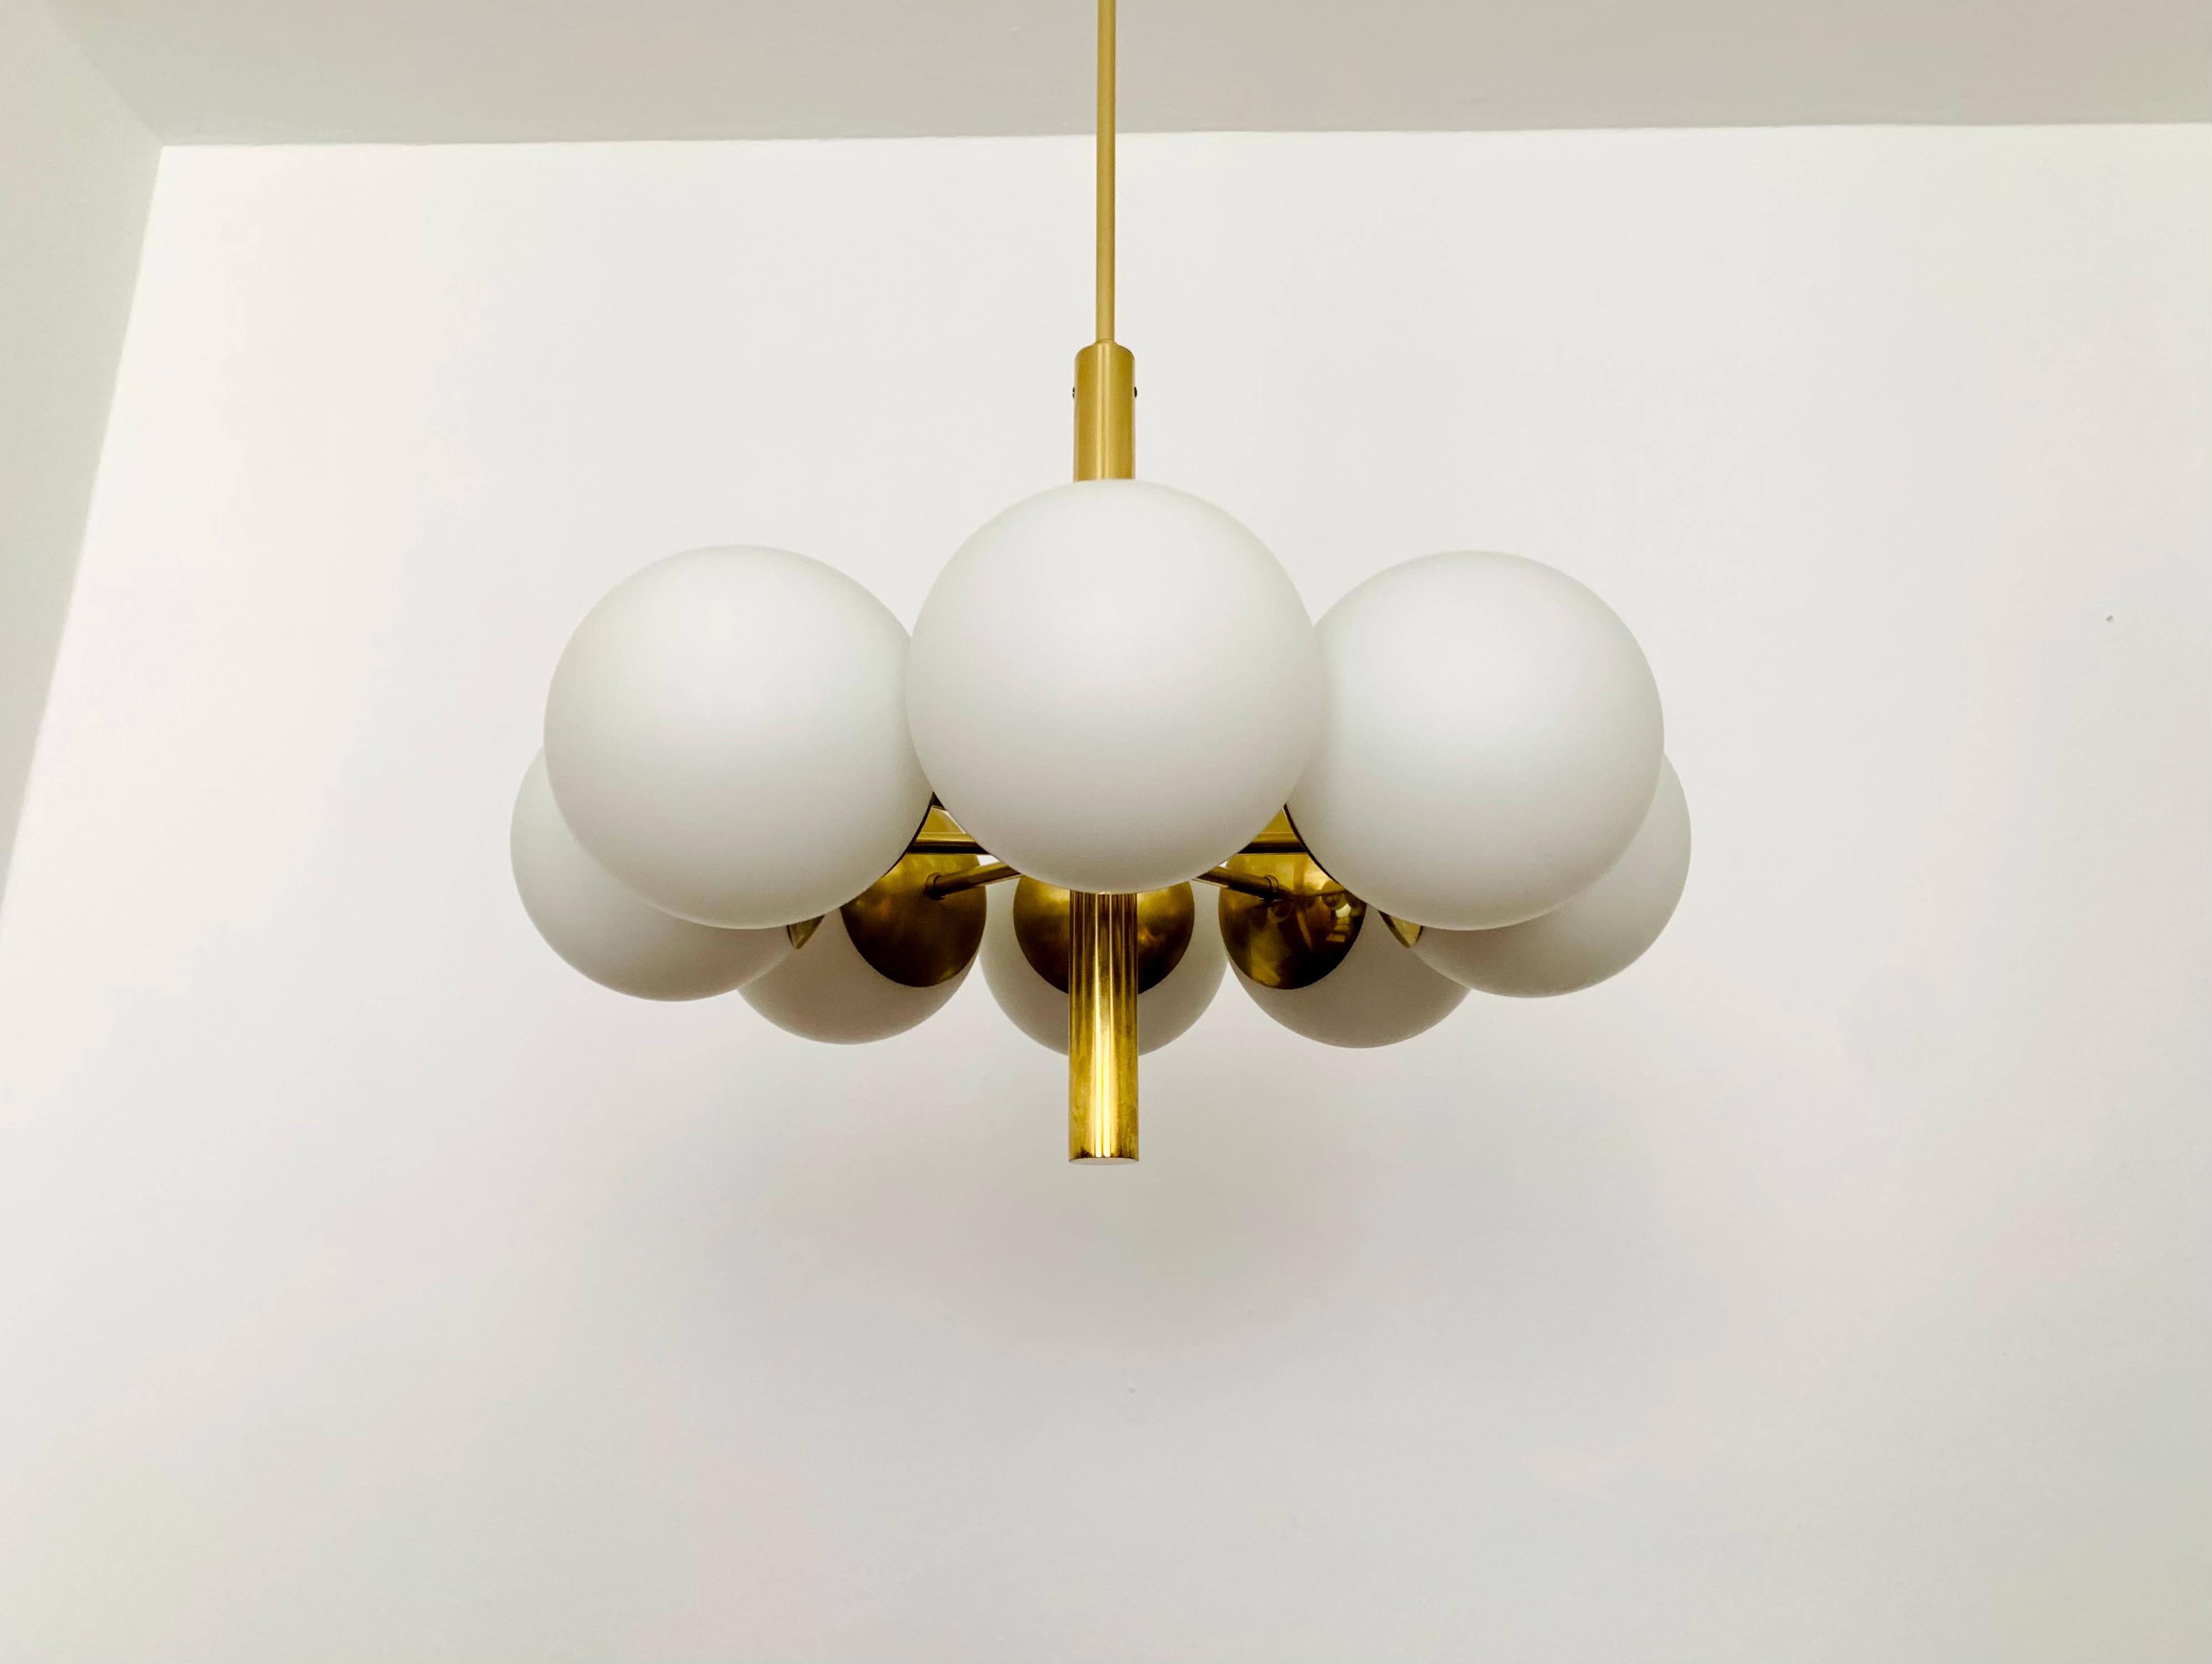 Wonderful gold Sputnik chandelier from the 1960s.
The opal glass lampshades spread a cozy light.
The lamp is manufactured to a very high quality.
Very contemporary design with a fantastic look.

Manufacturer: Kaiser Leuchten

Condition:

Very good